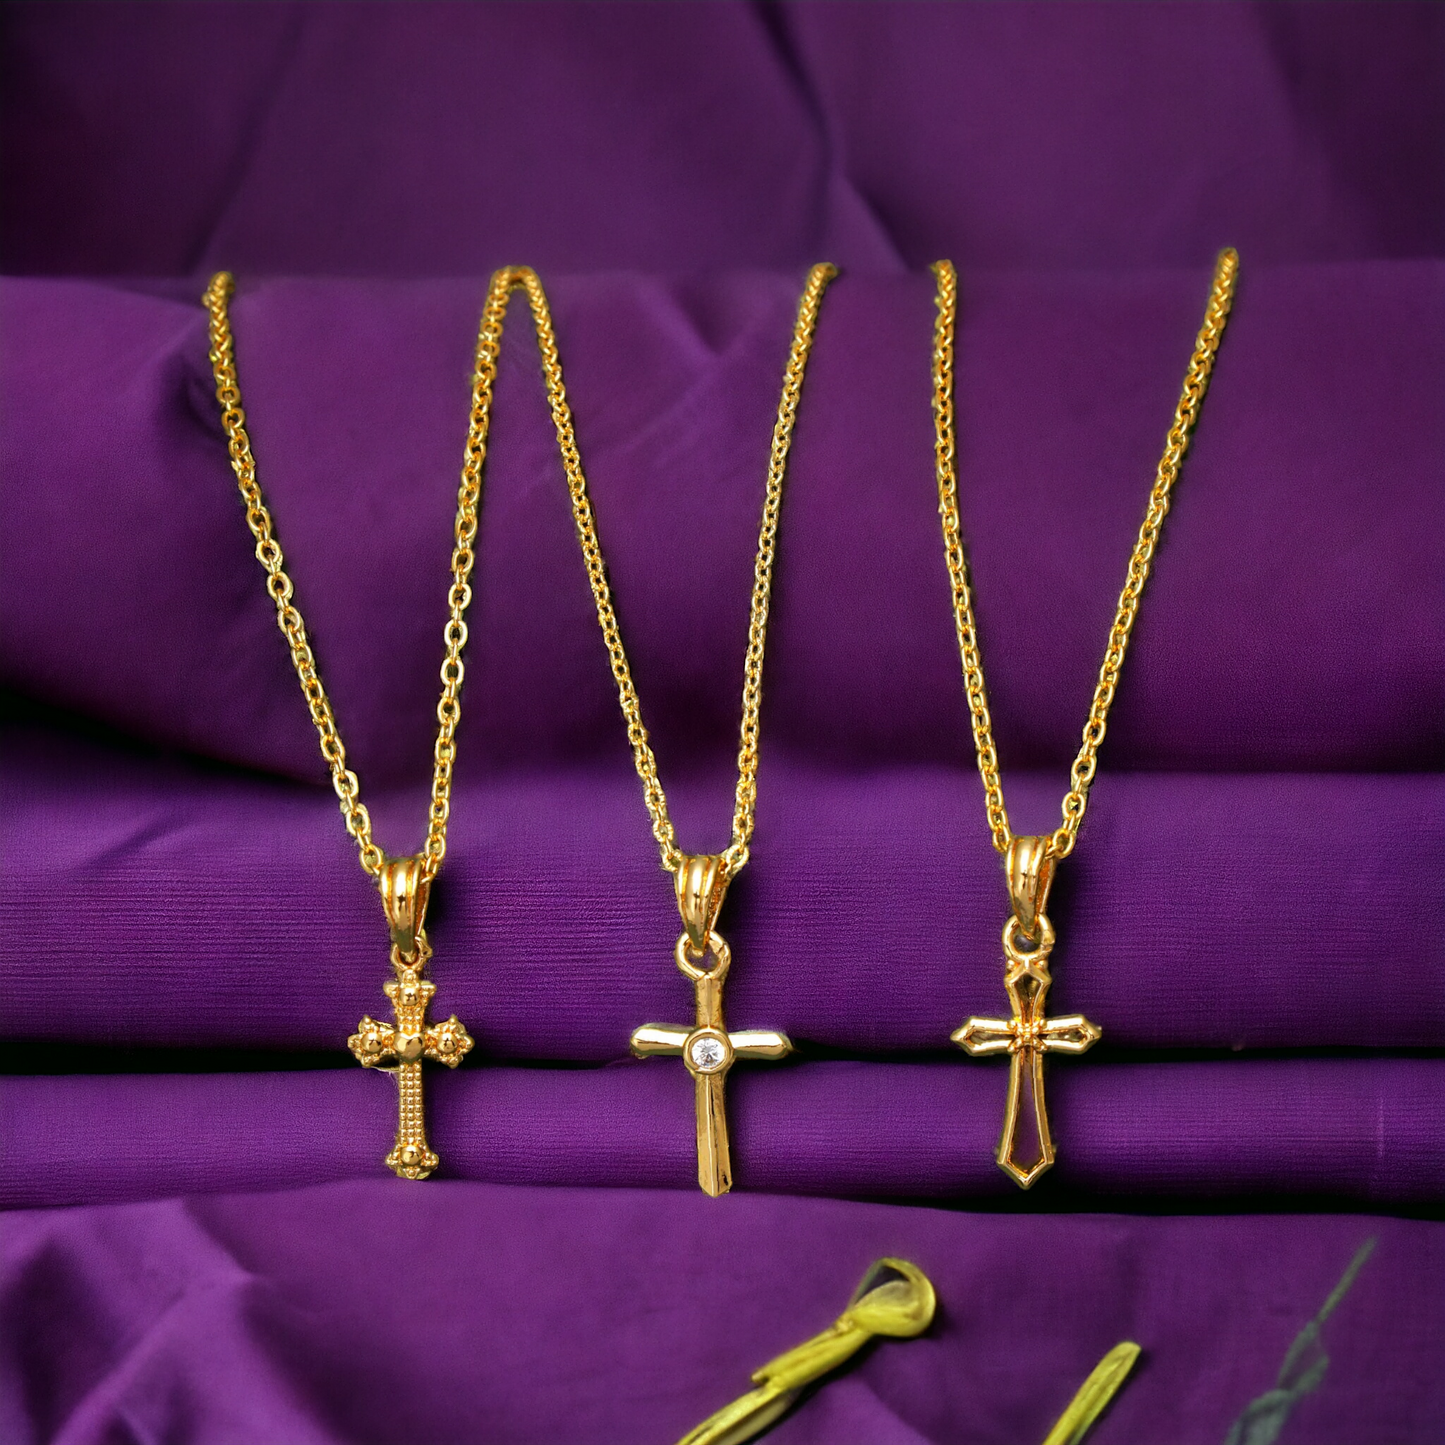 Set of 3 Cross Shape Jesus Gold Plated Necklace Chains for Girls and Men